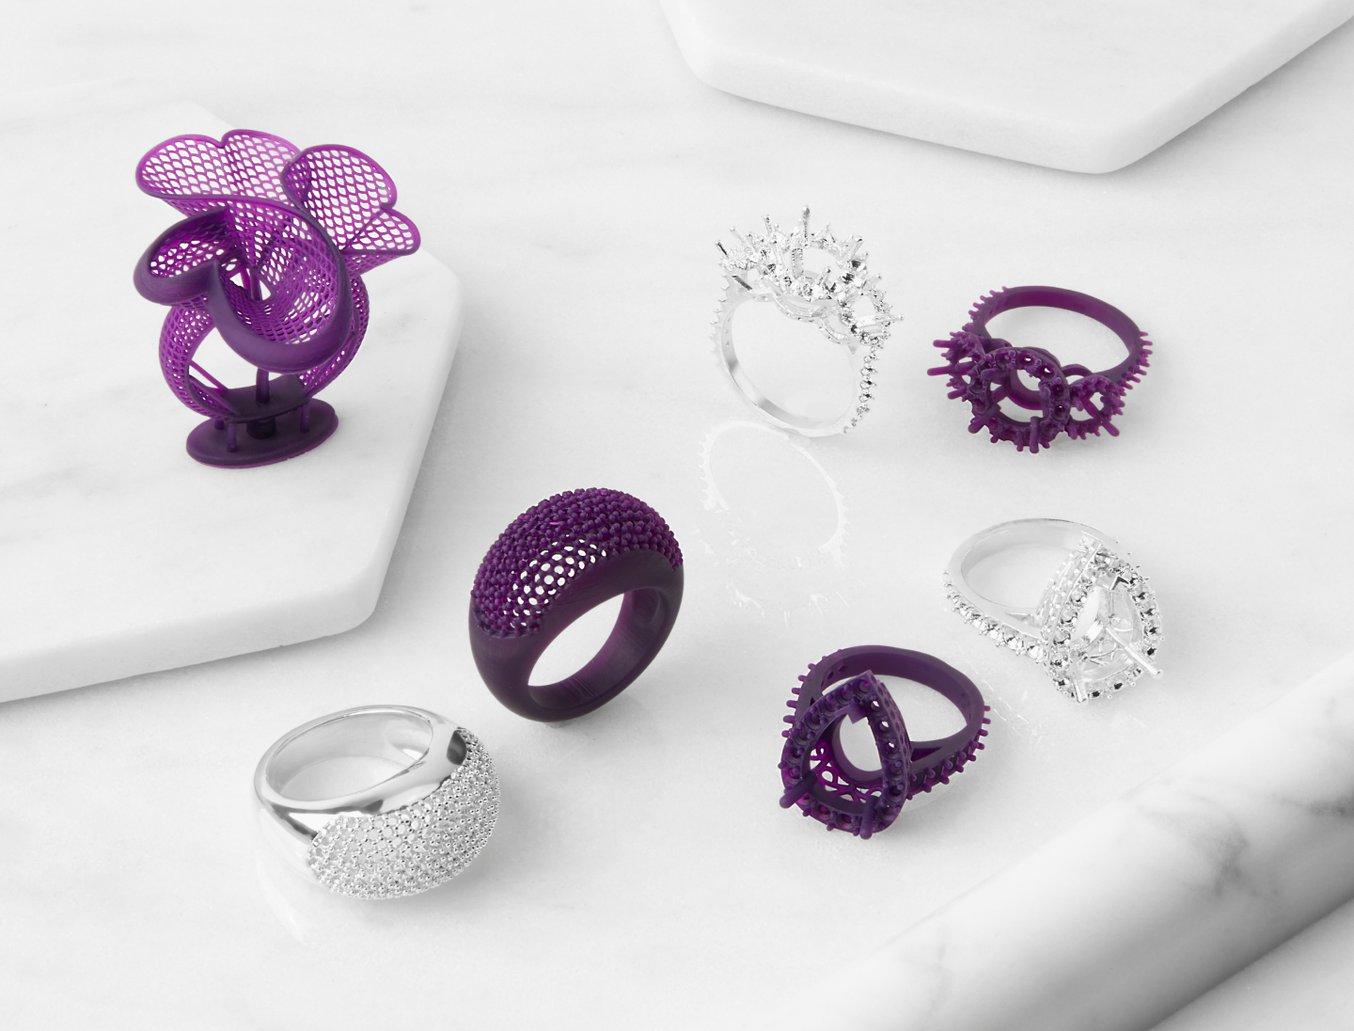 Formlabs Jewelry Resins